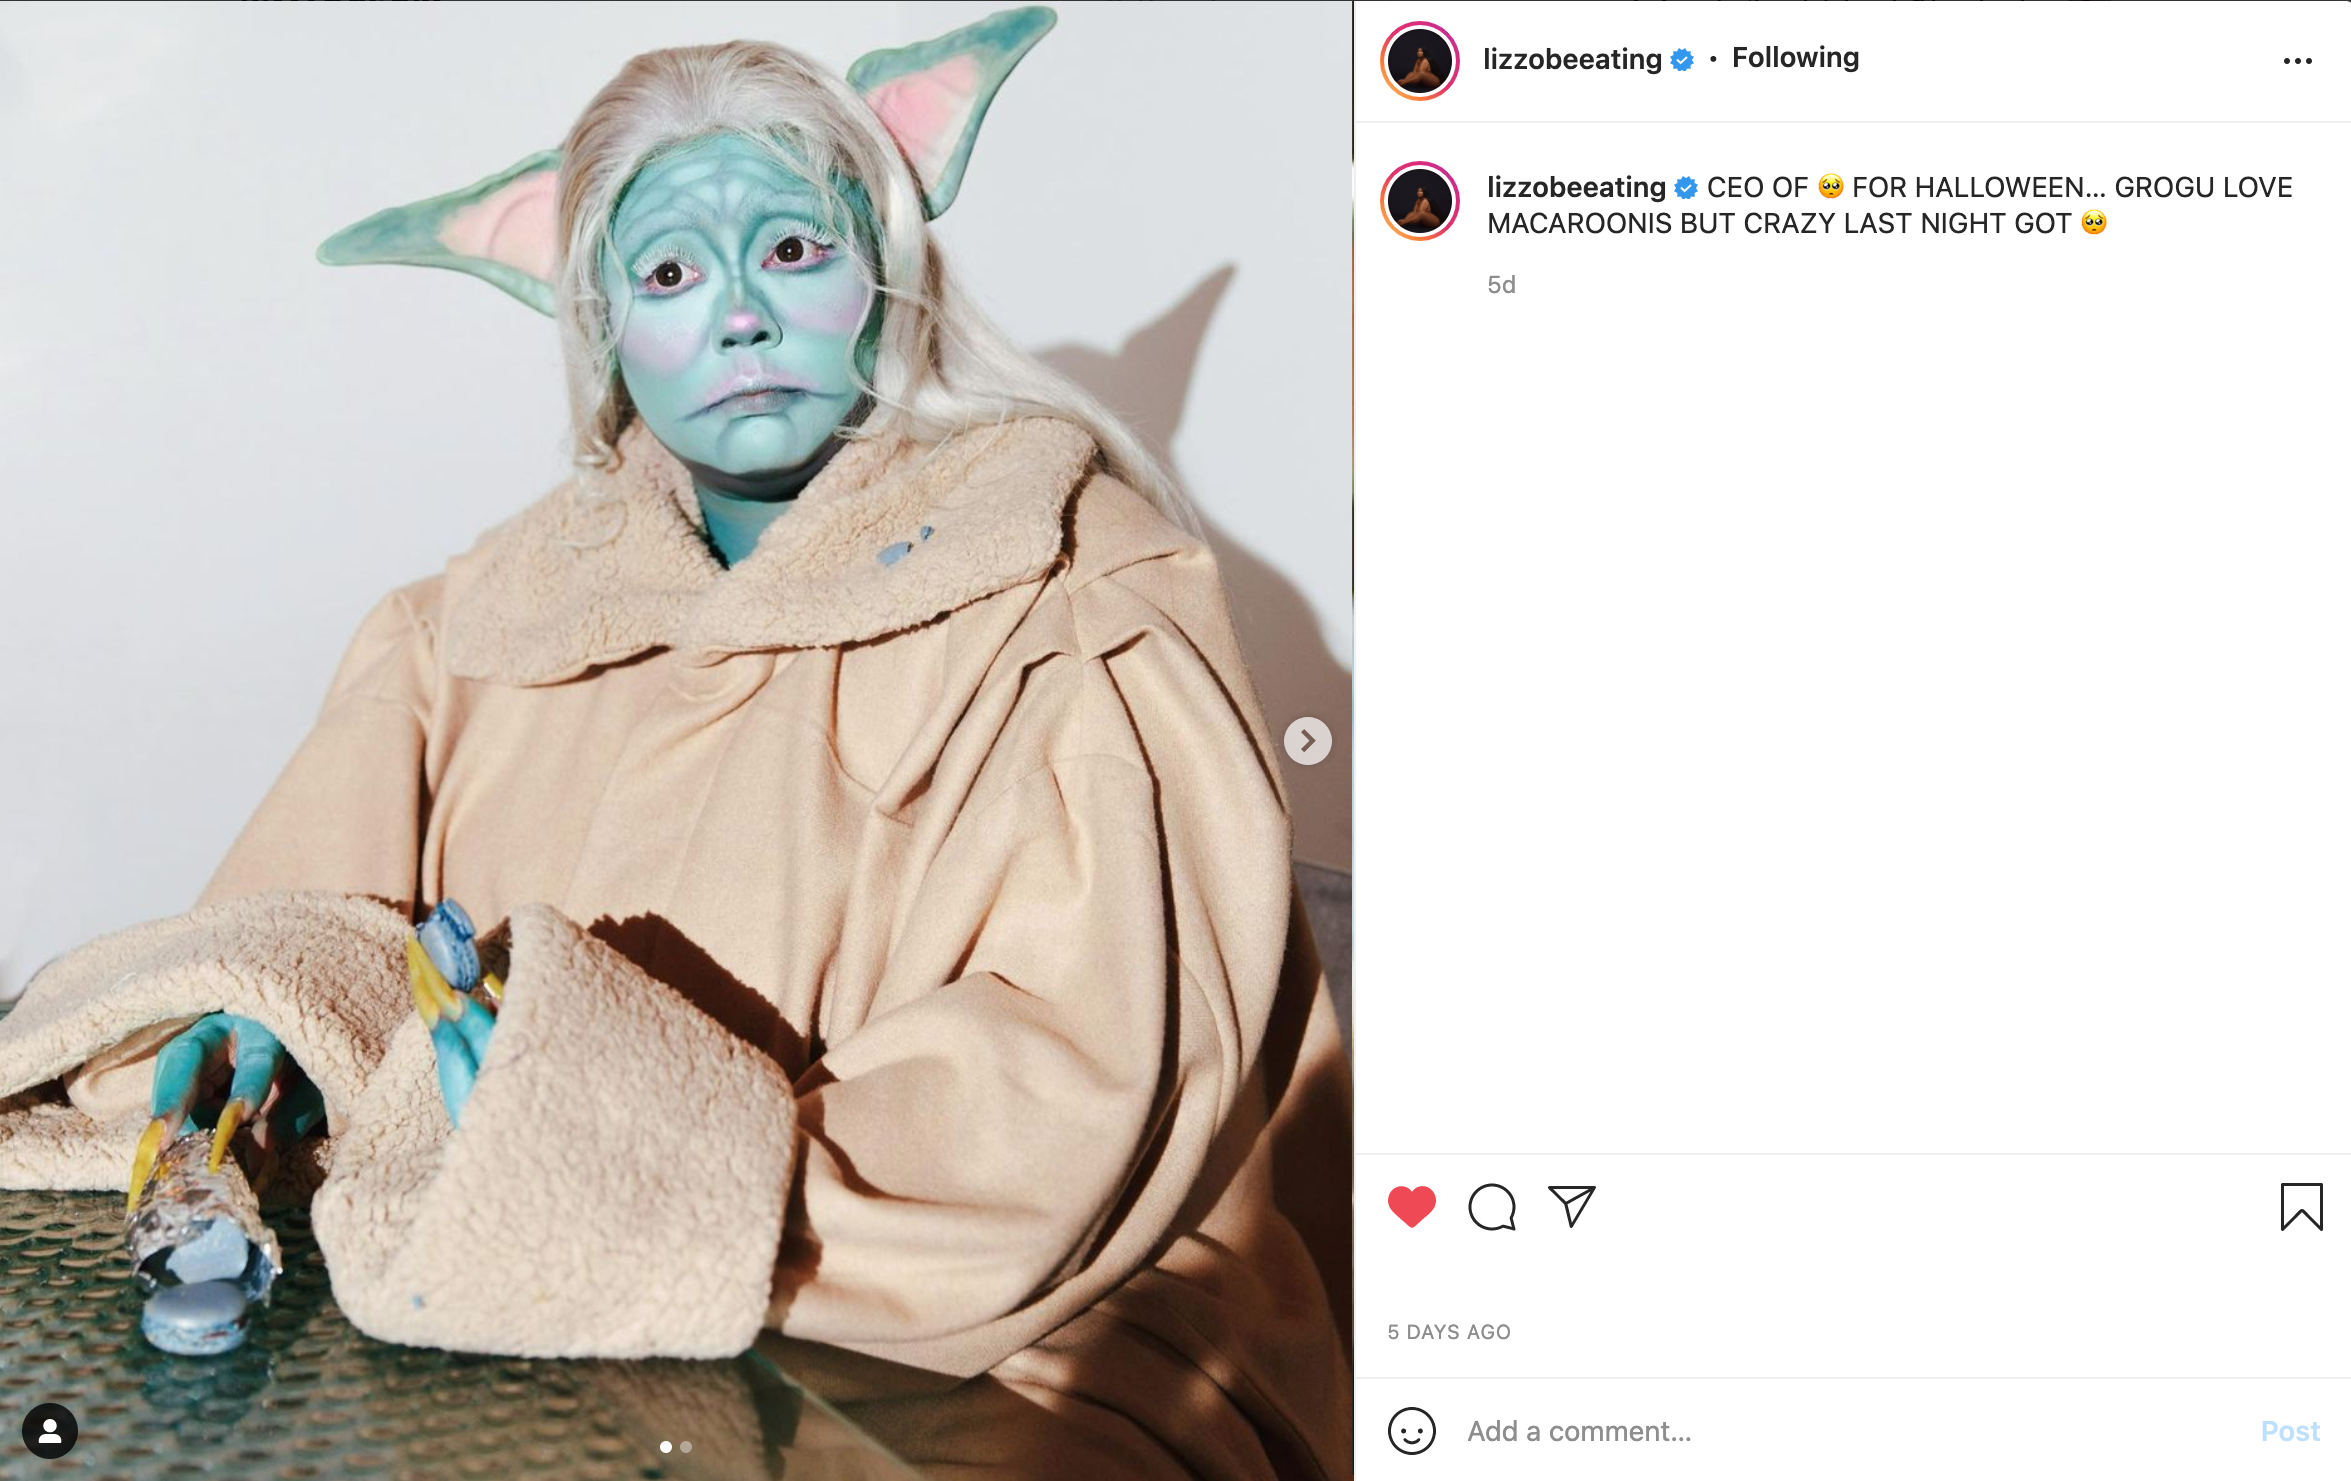 Lizzo Won This Year’s Halloween celebrity dressed as baby yoda